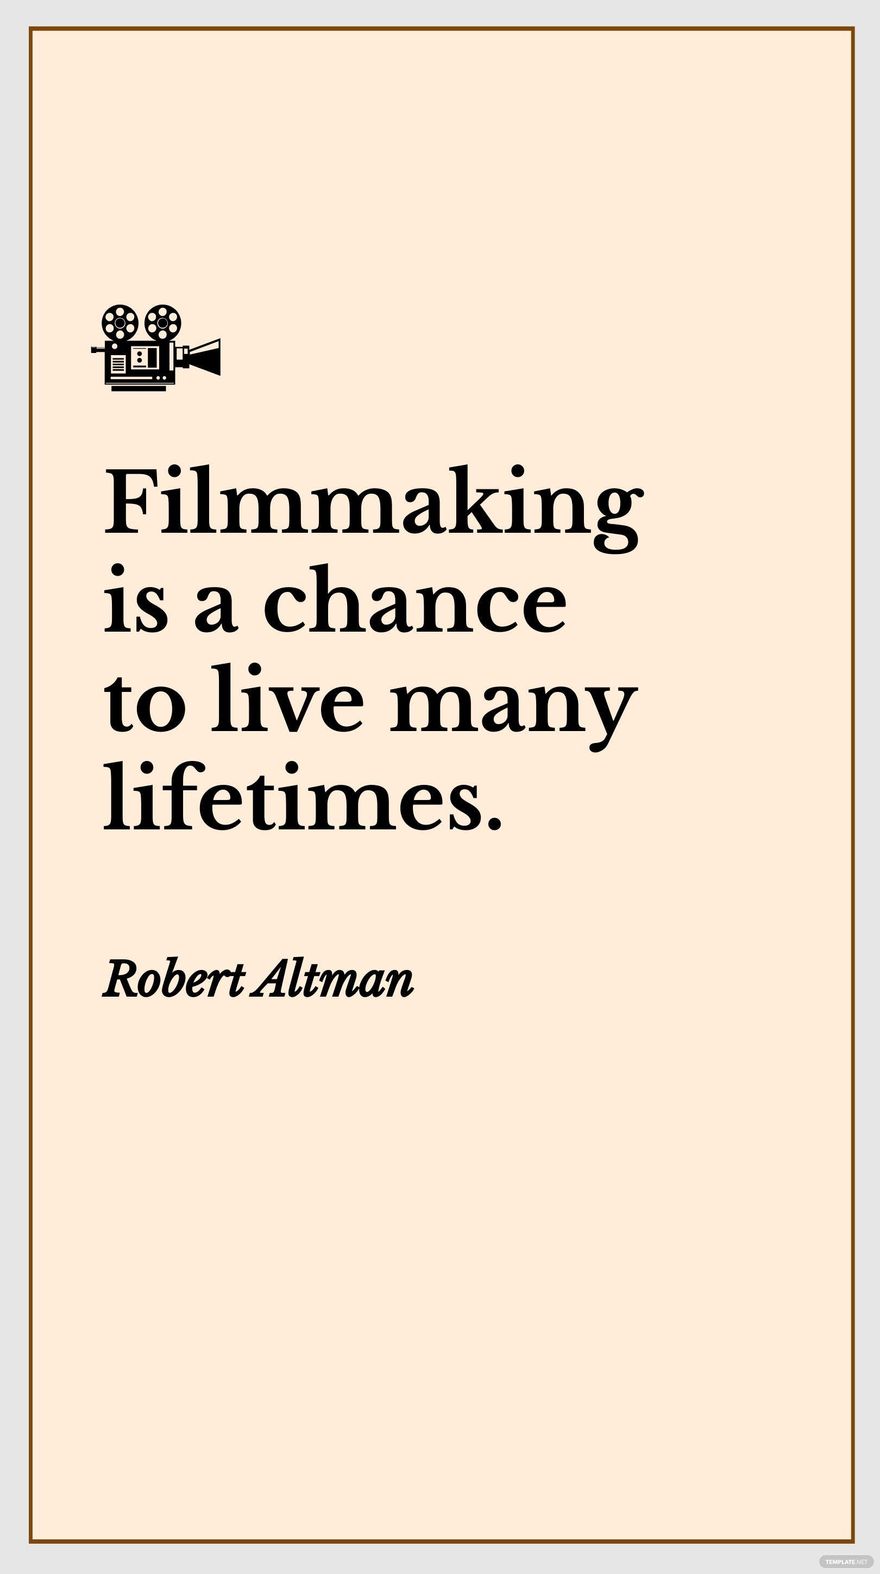 Robert Altman - Filmmaking is a chance to live many lifetimes.